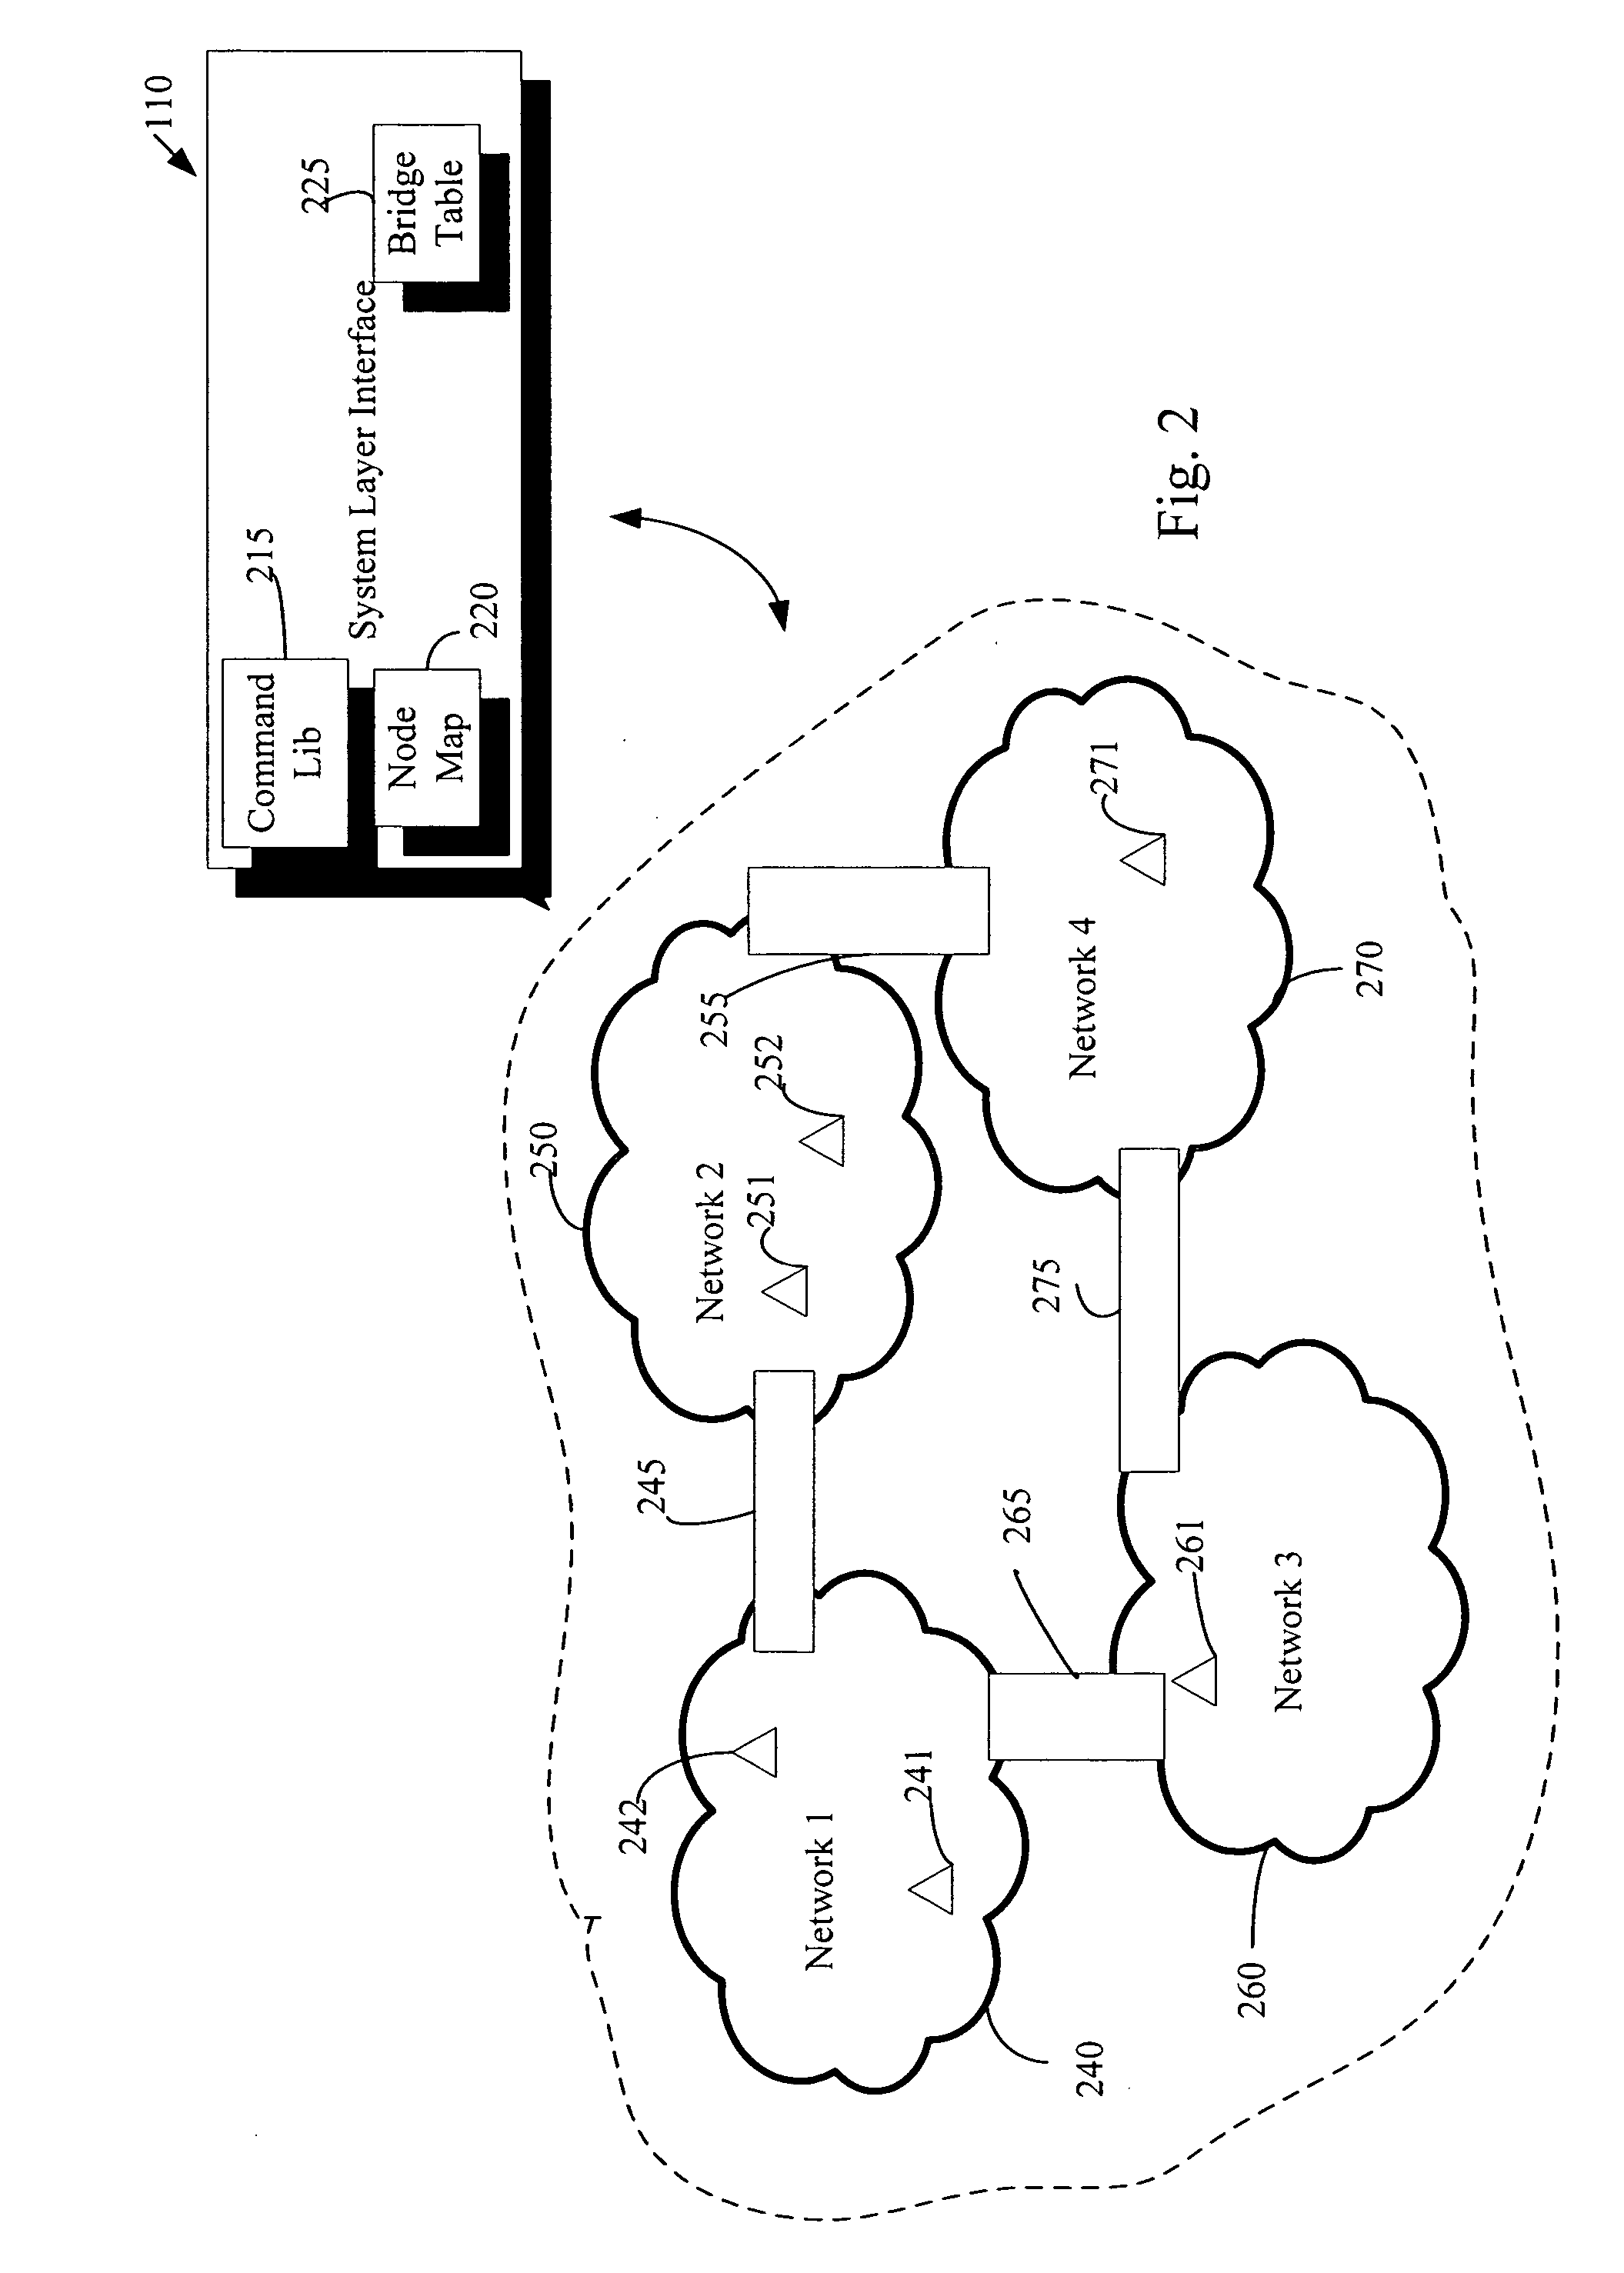 Proxy commands and devices for a home automation data transfer system